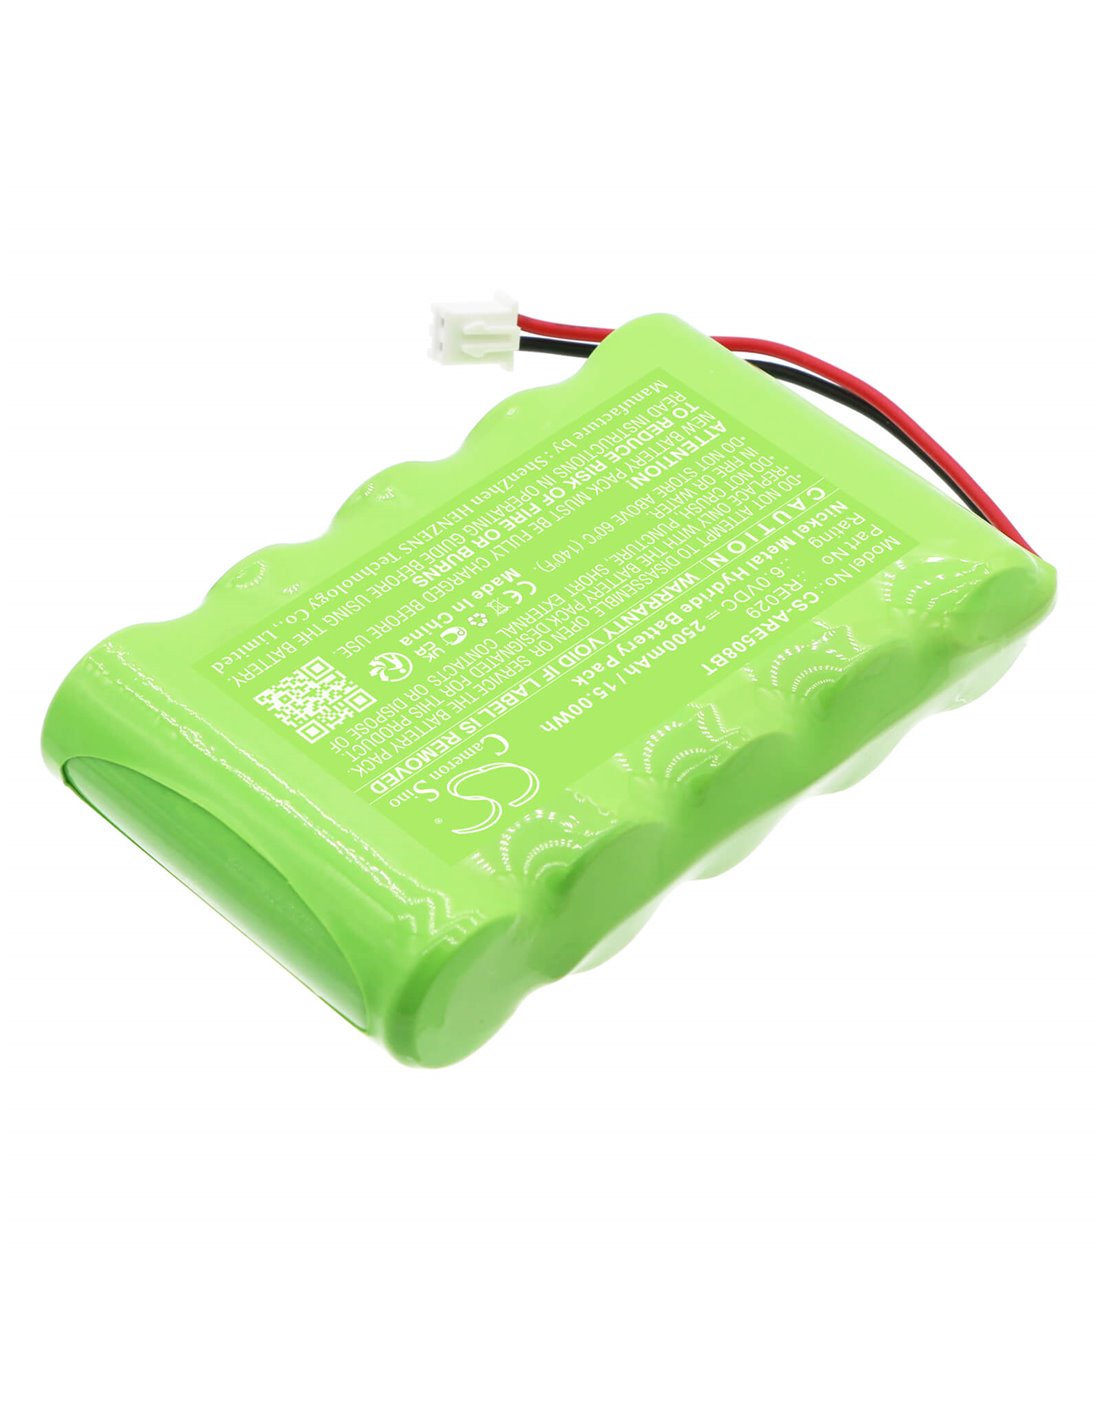 6.0V, Ni-MH, 2500mAh, Battery fits Alula, Connect+ Control Panel, Re508x, 15.00Wh